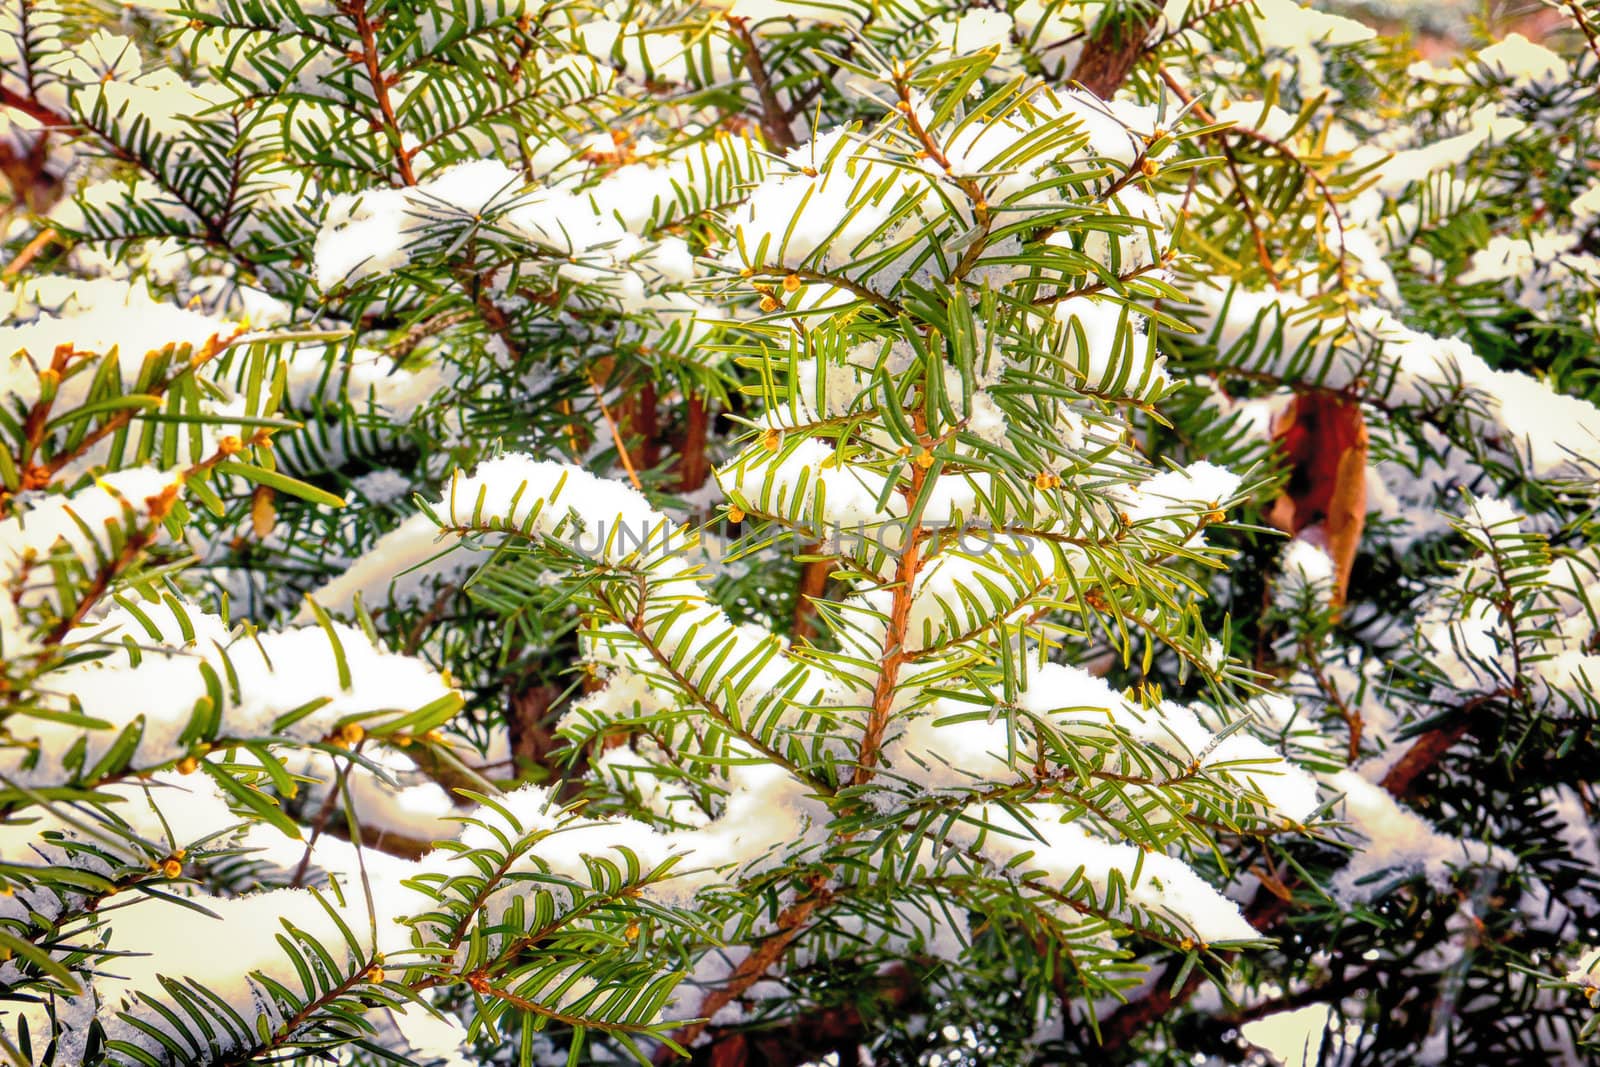 Yew Branches in the Winter Snow